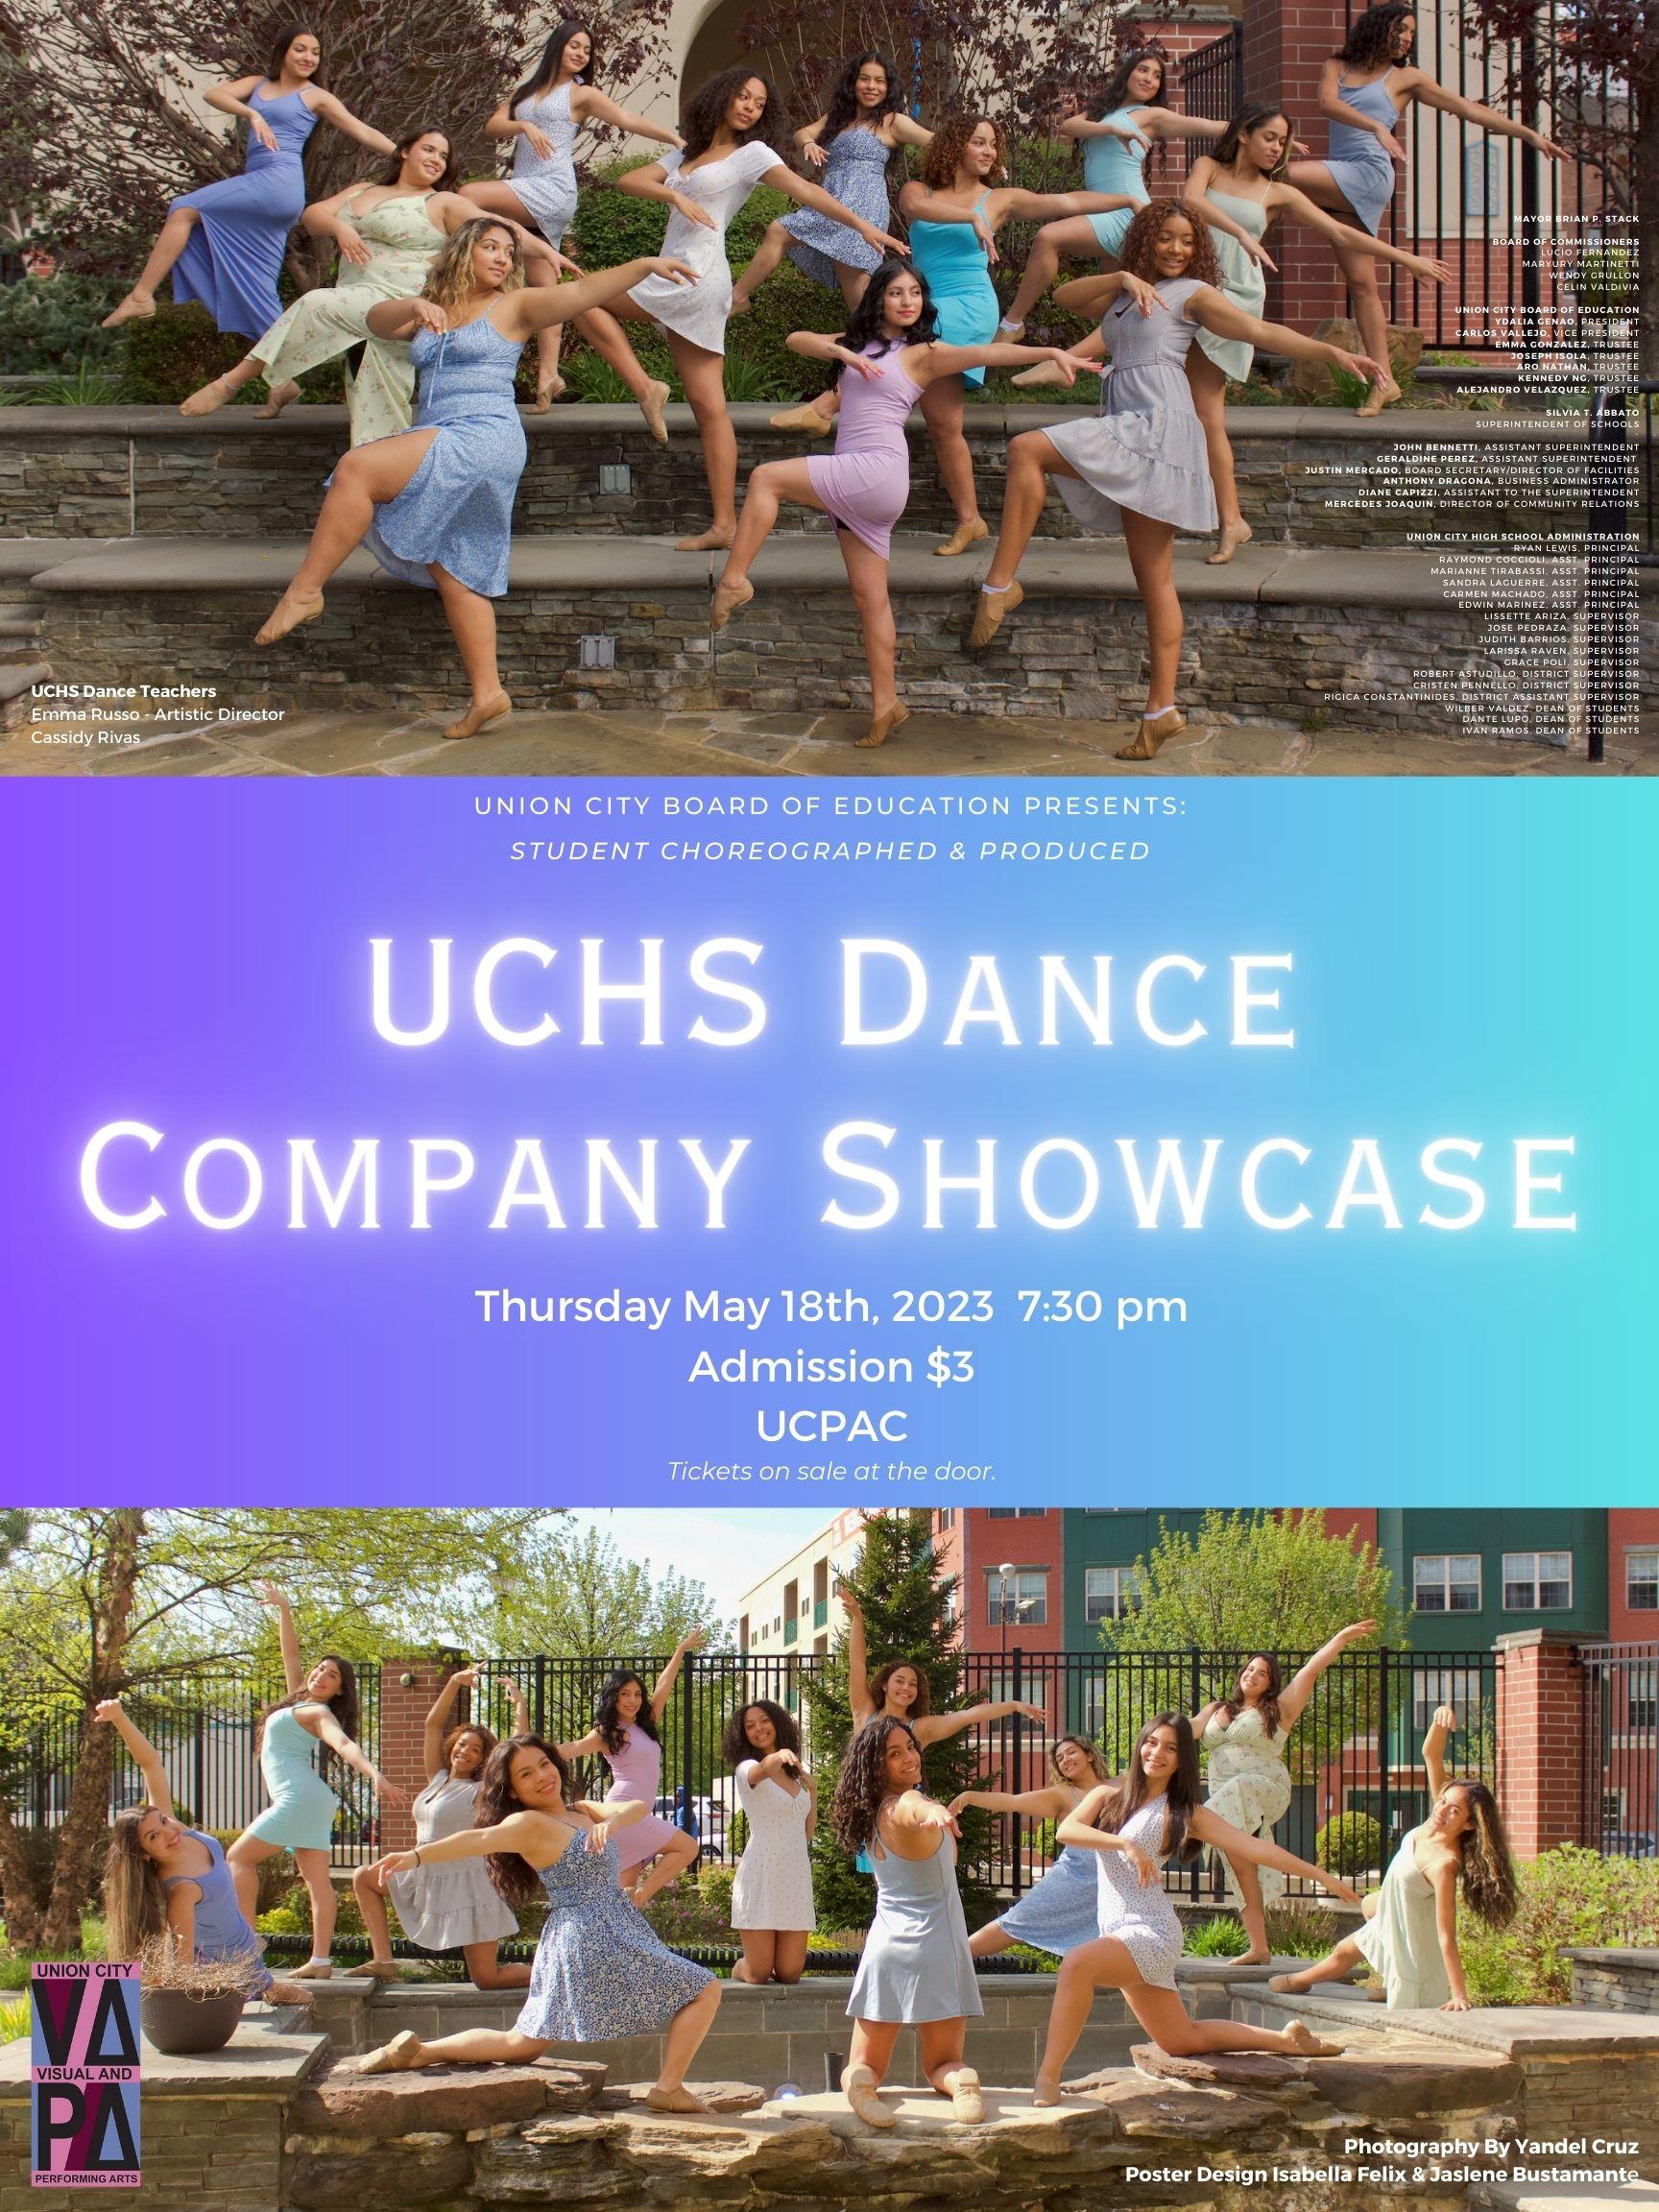 The UCHS Dance Company Showcase Reminder For Thursday May 18, 2023